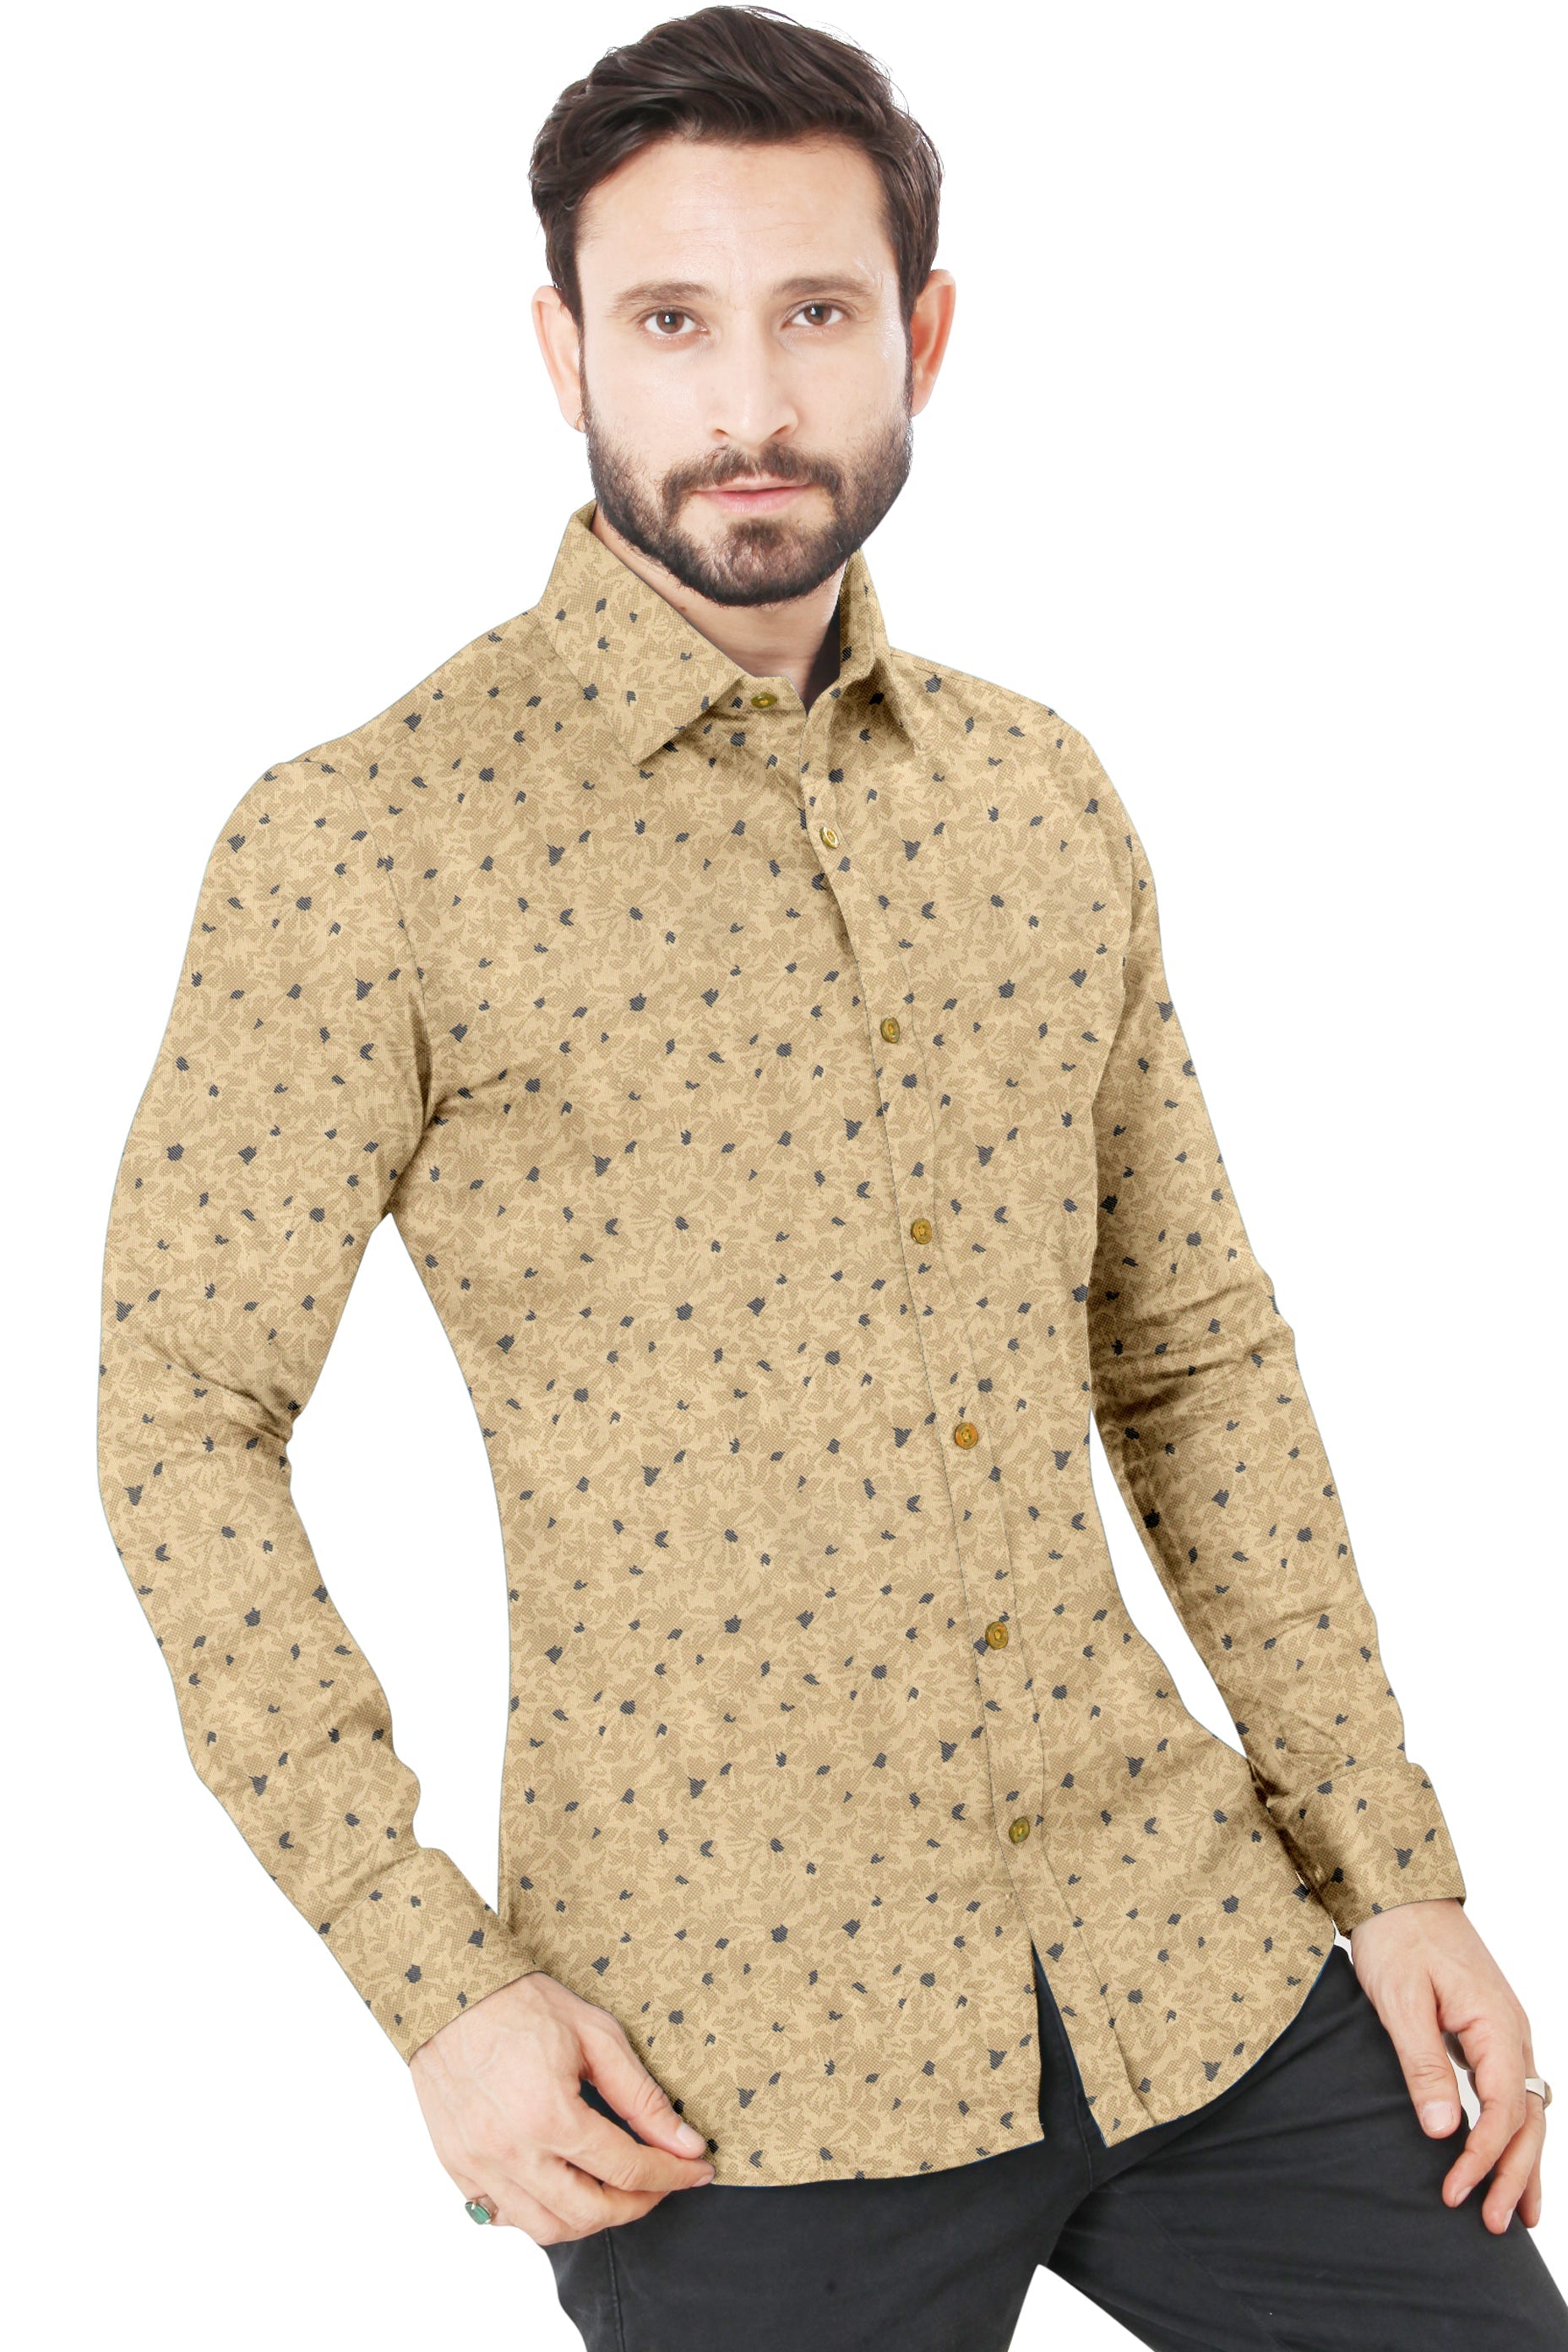 Men's Yellow Printed Casual Shirt Full Sleeves 100% Cotton 